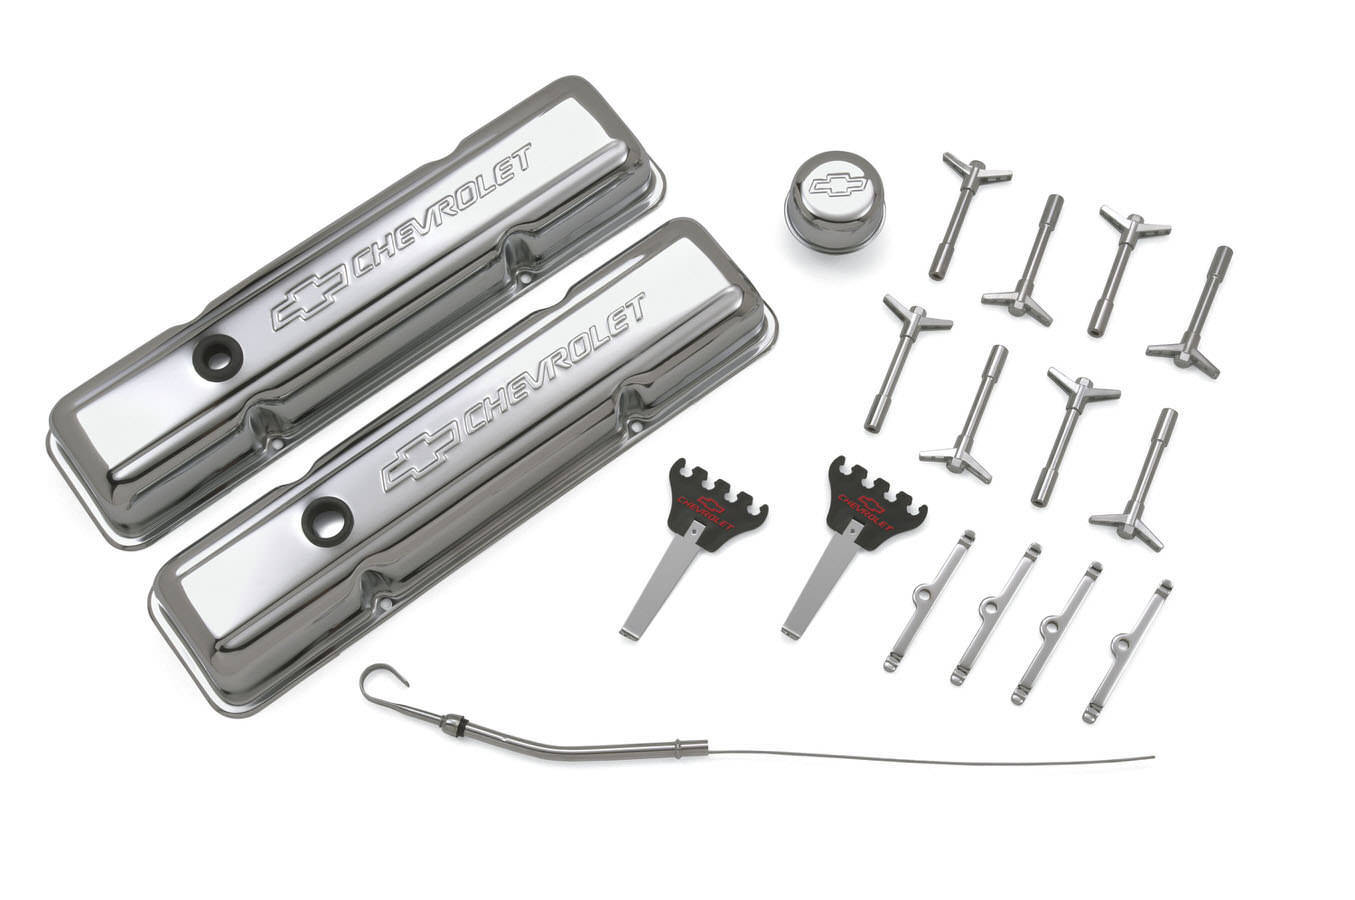 Proform 141-002 Engine Dress Up Kit, Breather / Dipstick / Hardware / Short Valve Covers / Wire Loom, Chevy Logo, Steel, Chrome, Small Block Chevy, Kit